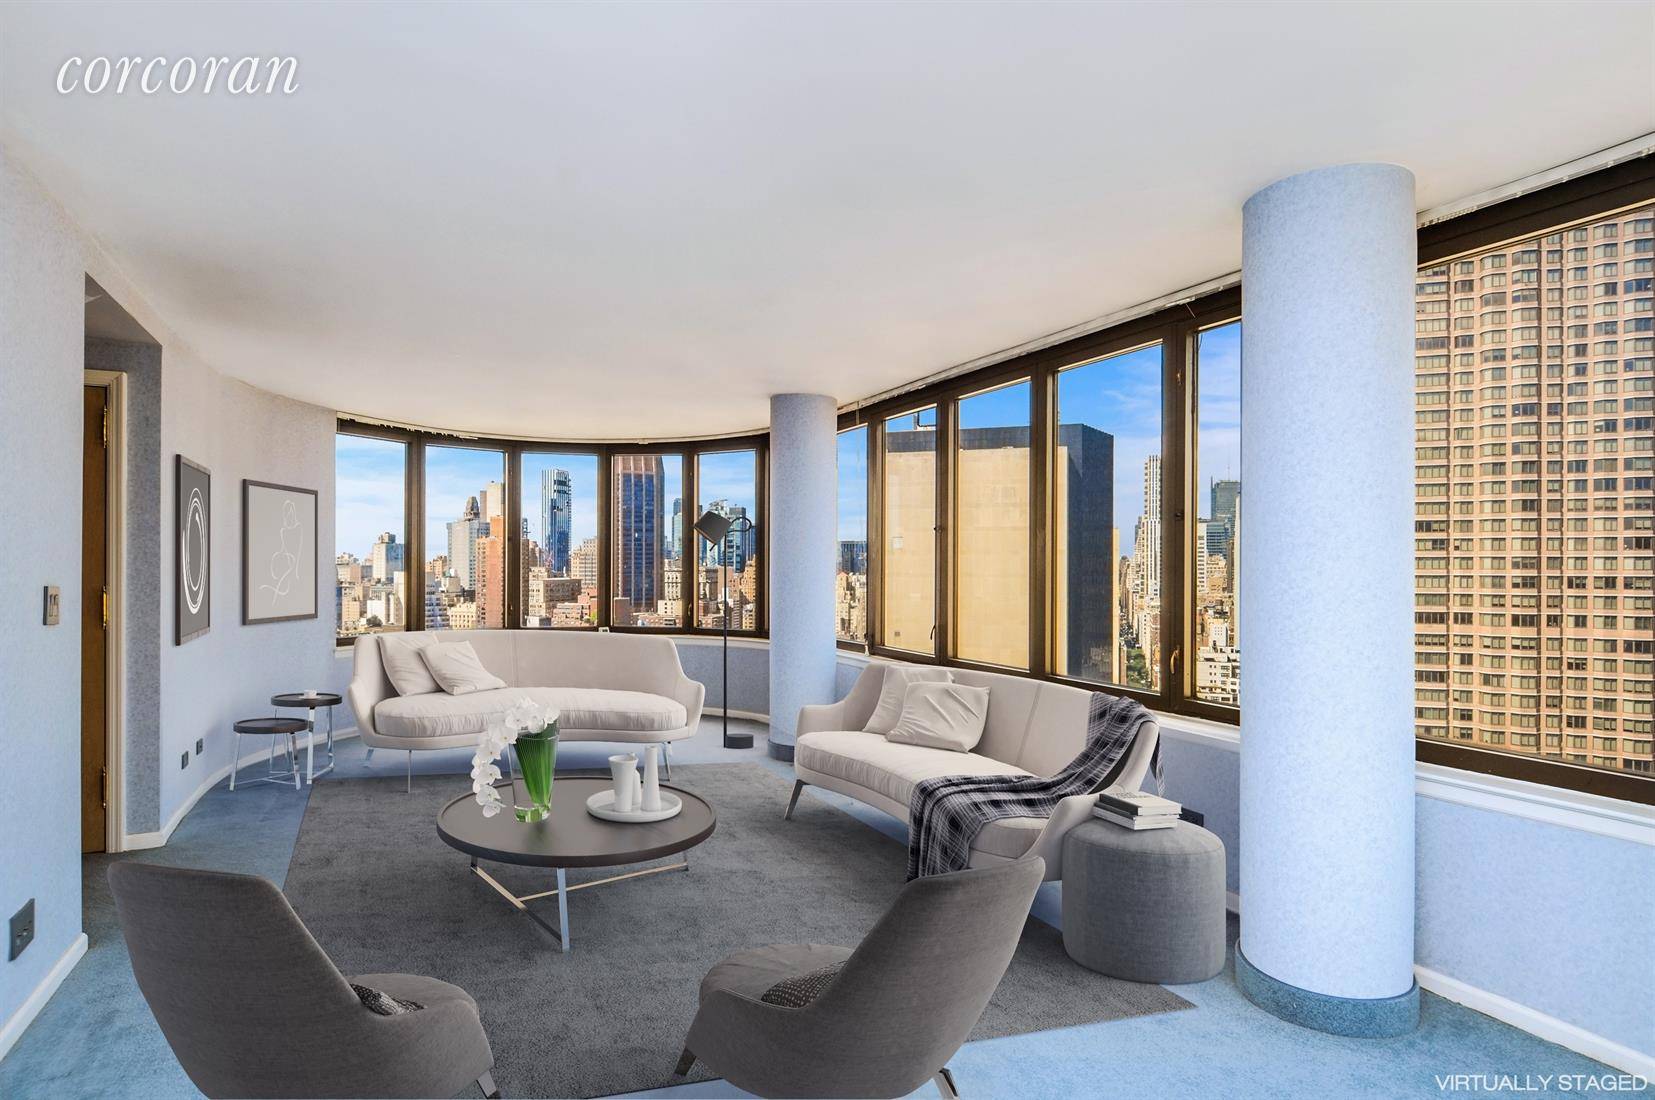 330 East 38th Street Apt 36E New York, NY 10016 CORINTHIAN CONDO Spectacular 360 degree view of Manhattan skyline, Empire State, Chrysler Building and East River from Large living room ...